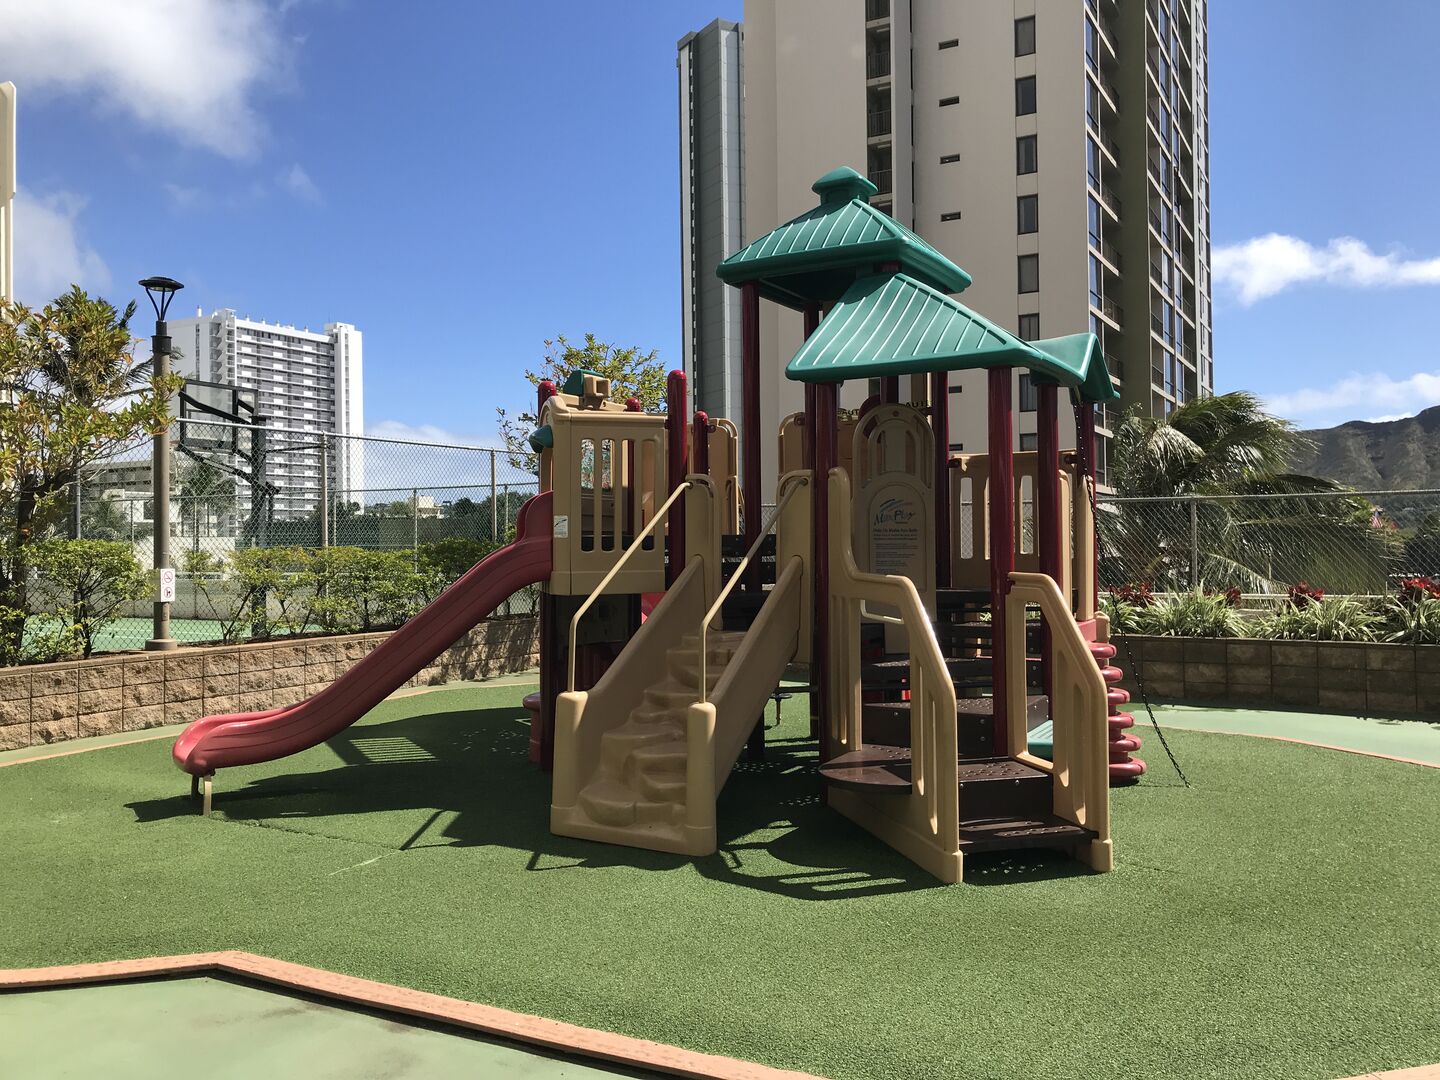 Your children can play in the playground on the 6th floor recreation deck.